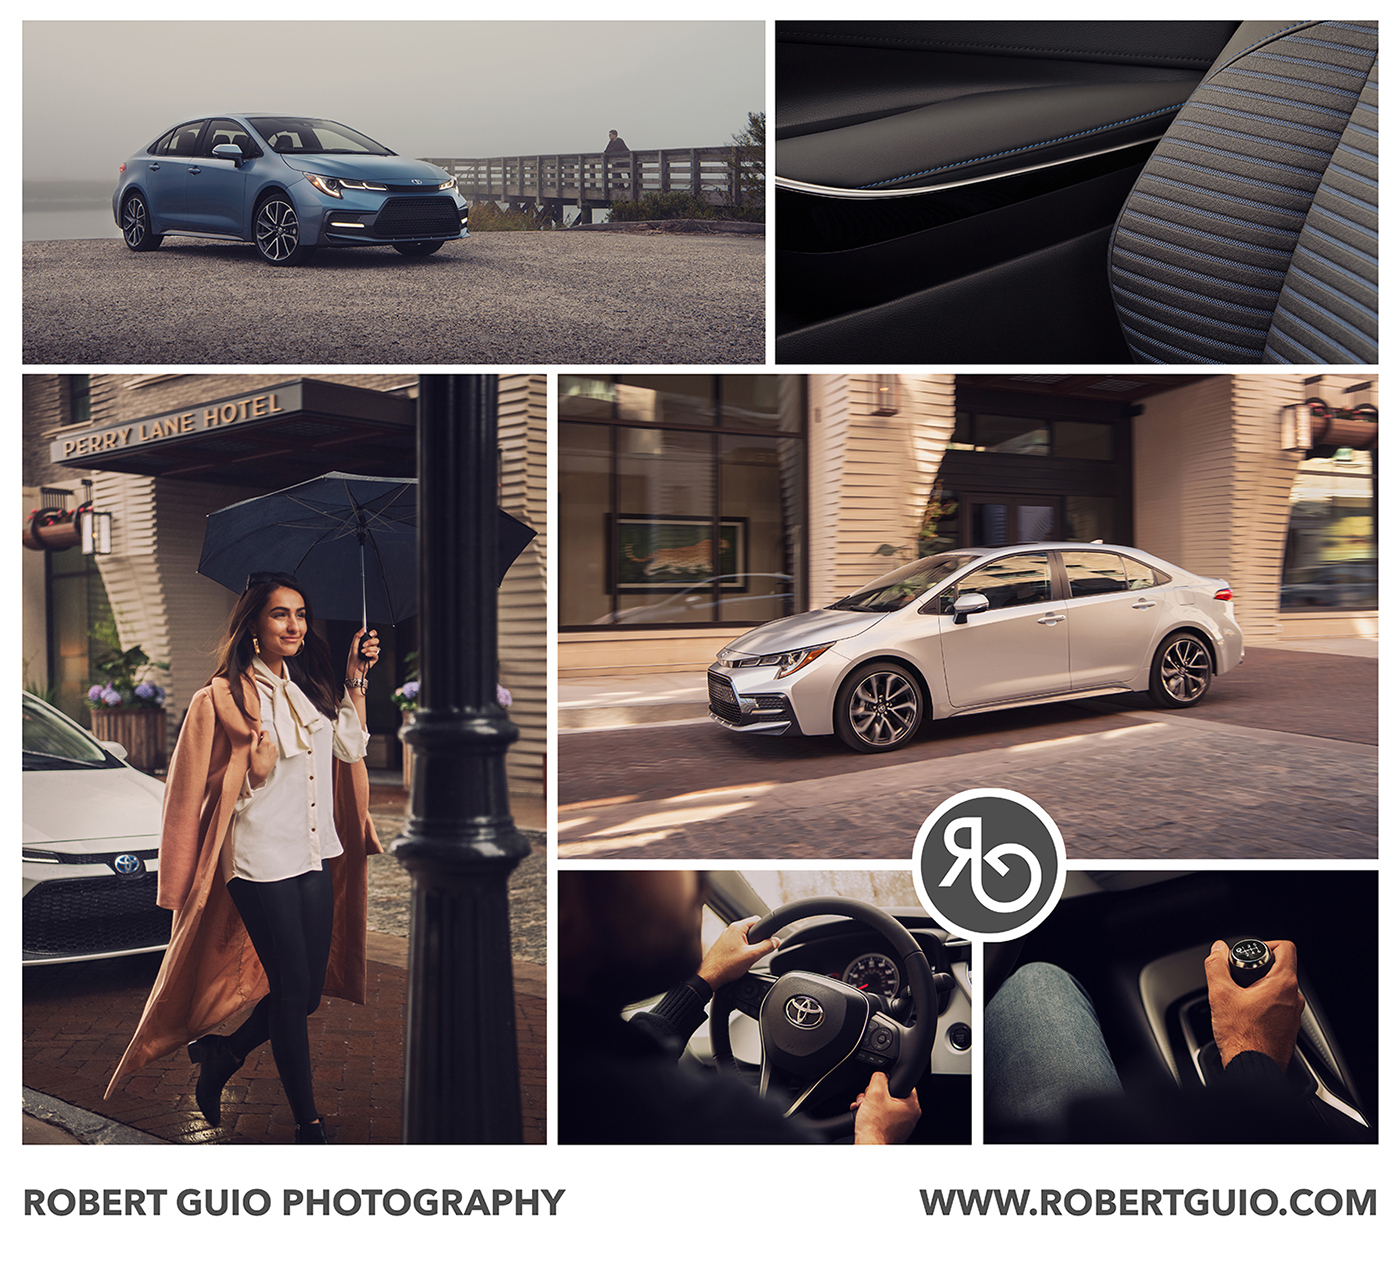 Automotive photography by Robert Guio, depicting car models and car details, as well as lifestyle photography. We used this digital promo as part of Robert's email campaign during the Client Introductions process.